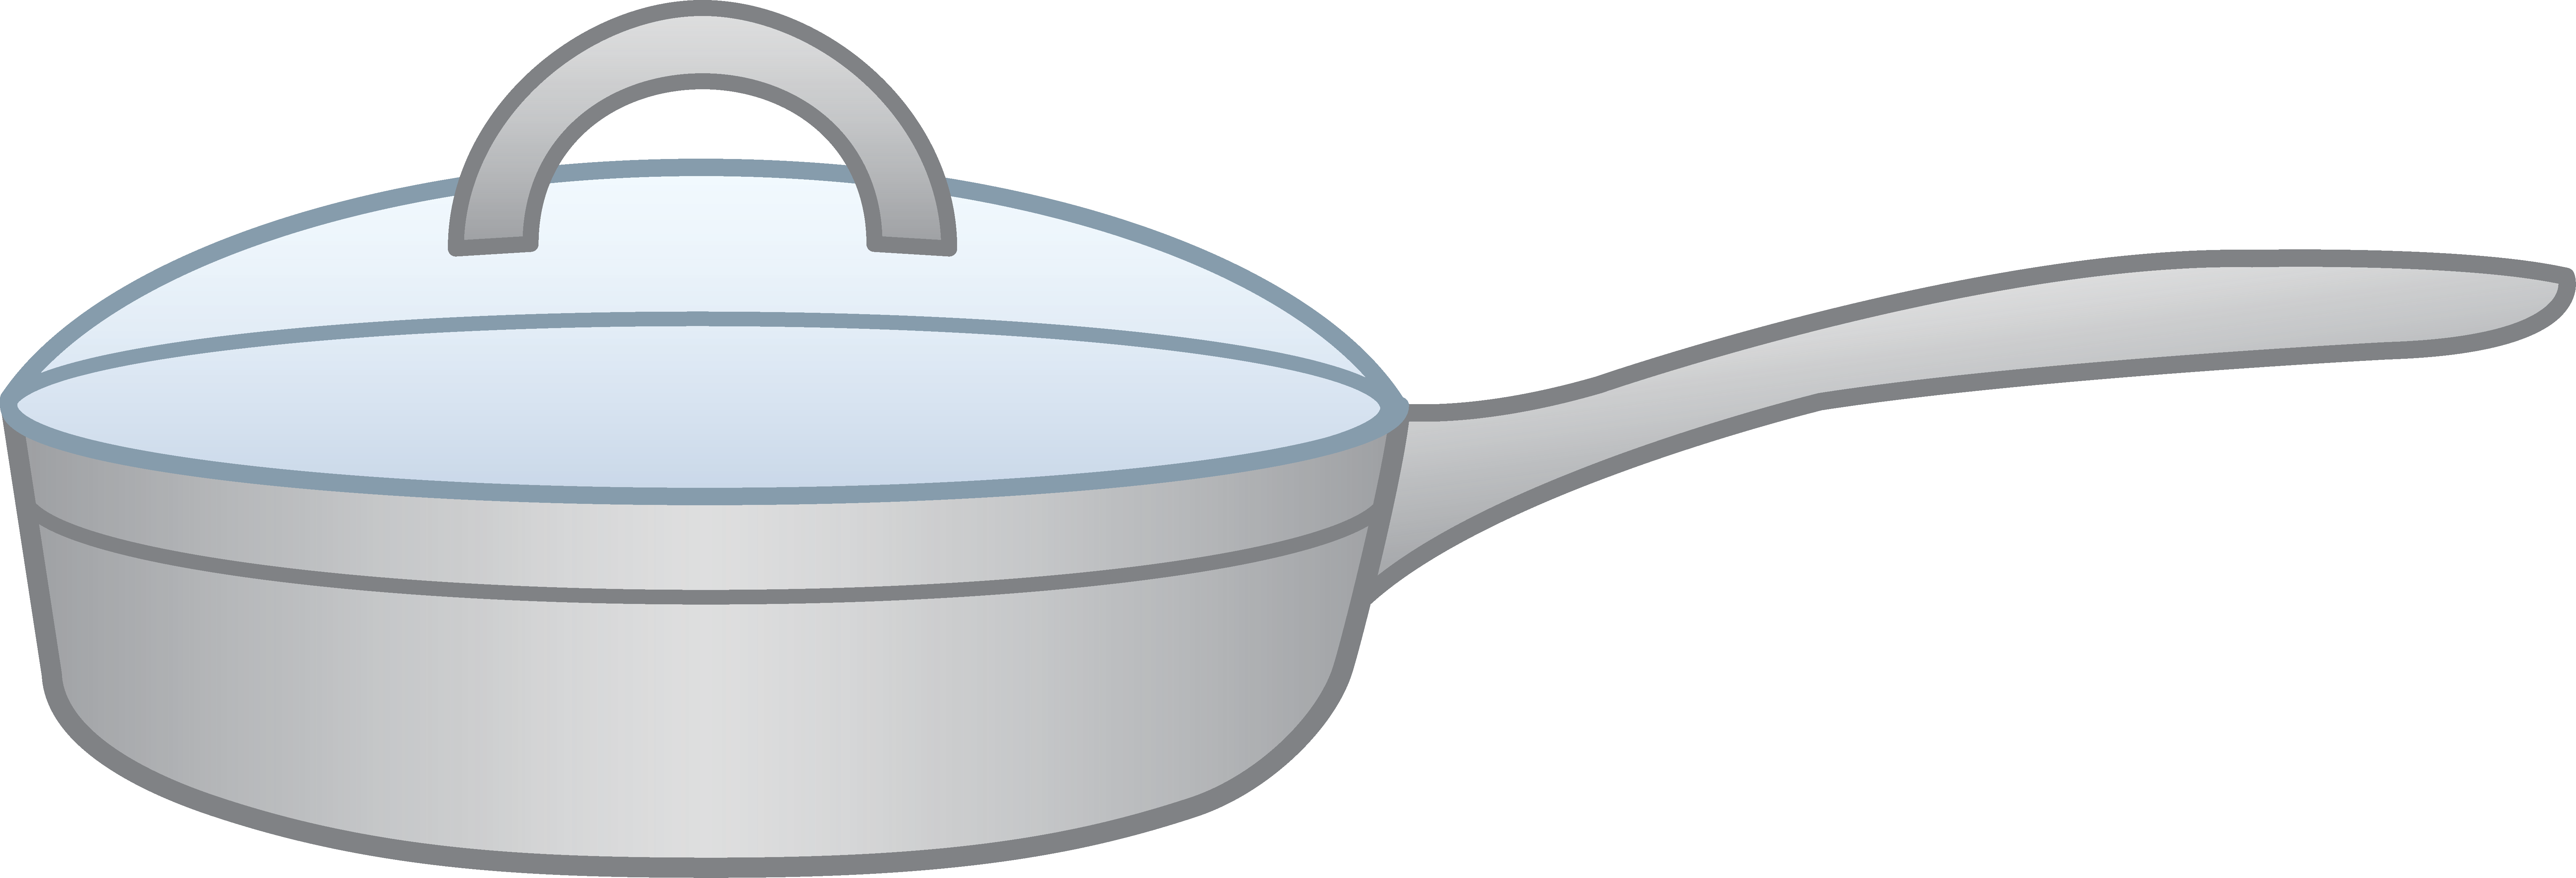 Graphic Pan Vector Animated Frying Pan